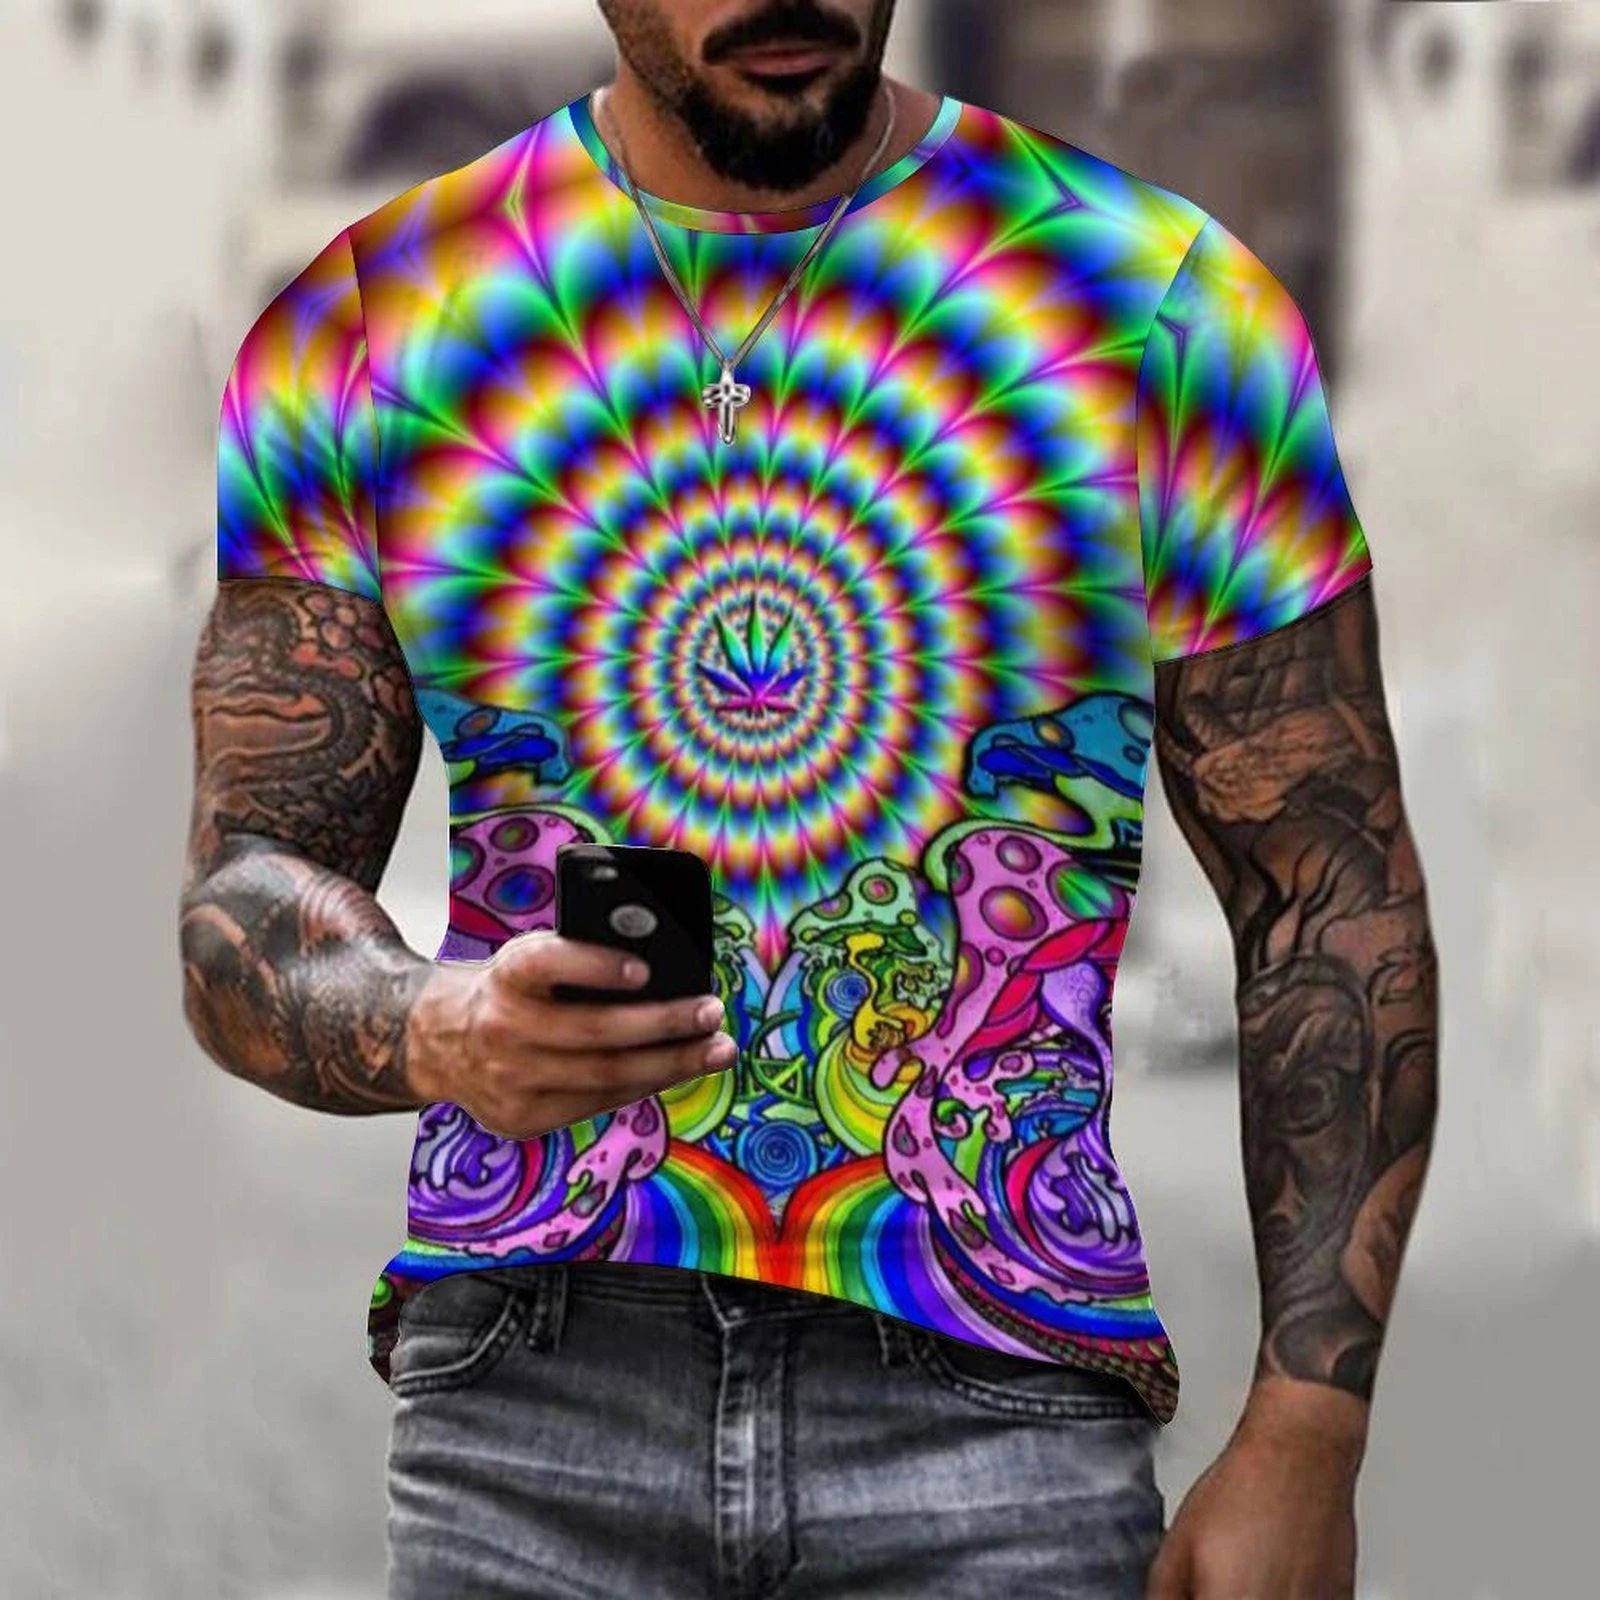 Weed Clothing Shirts | Weed Aesthetic Clothes | Weed Clothing Design ...